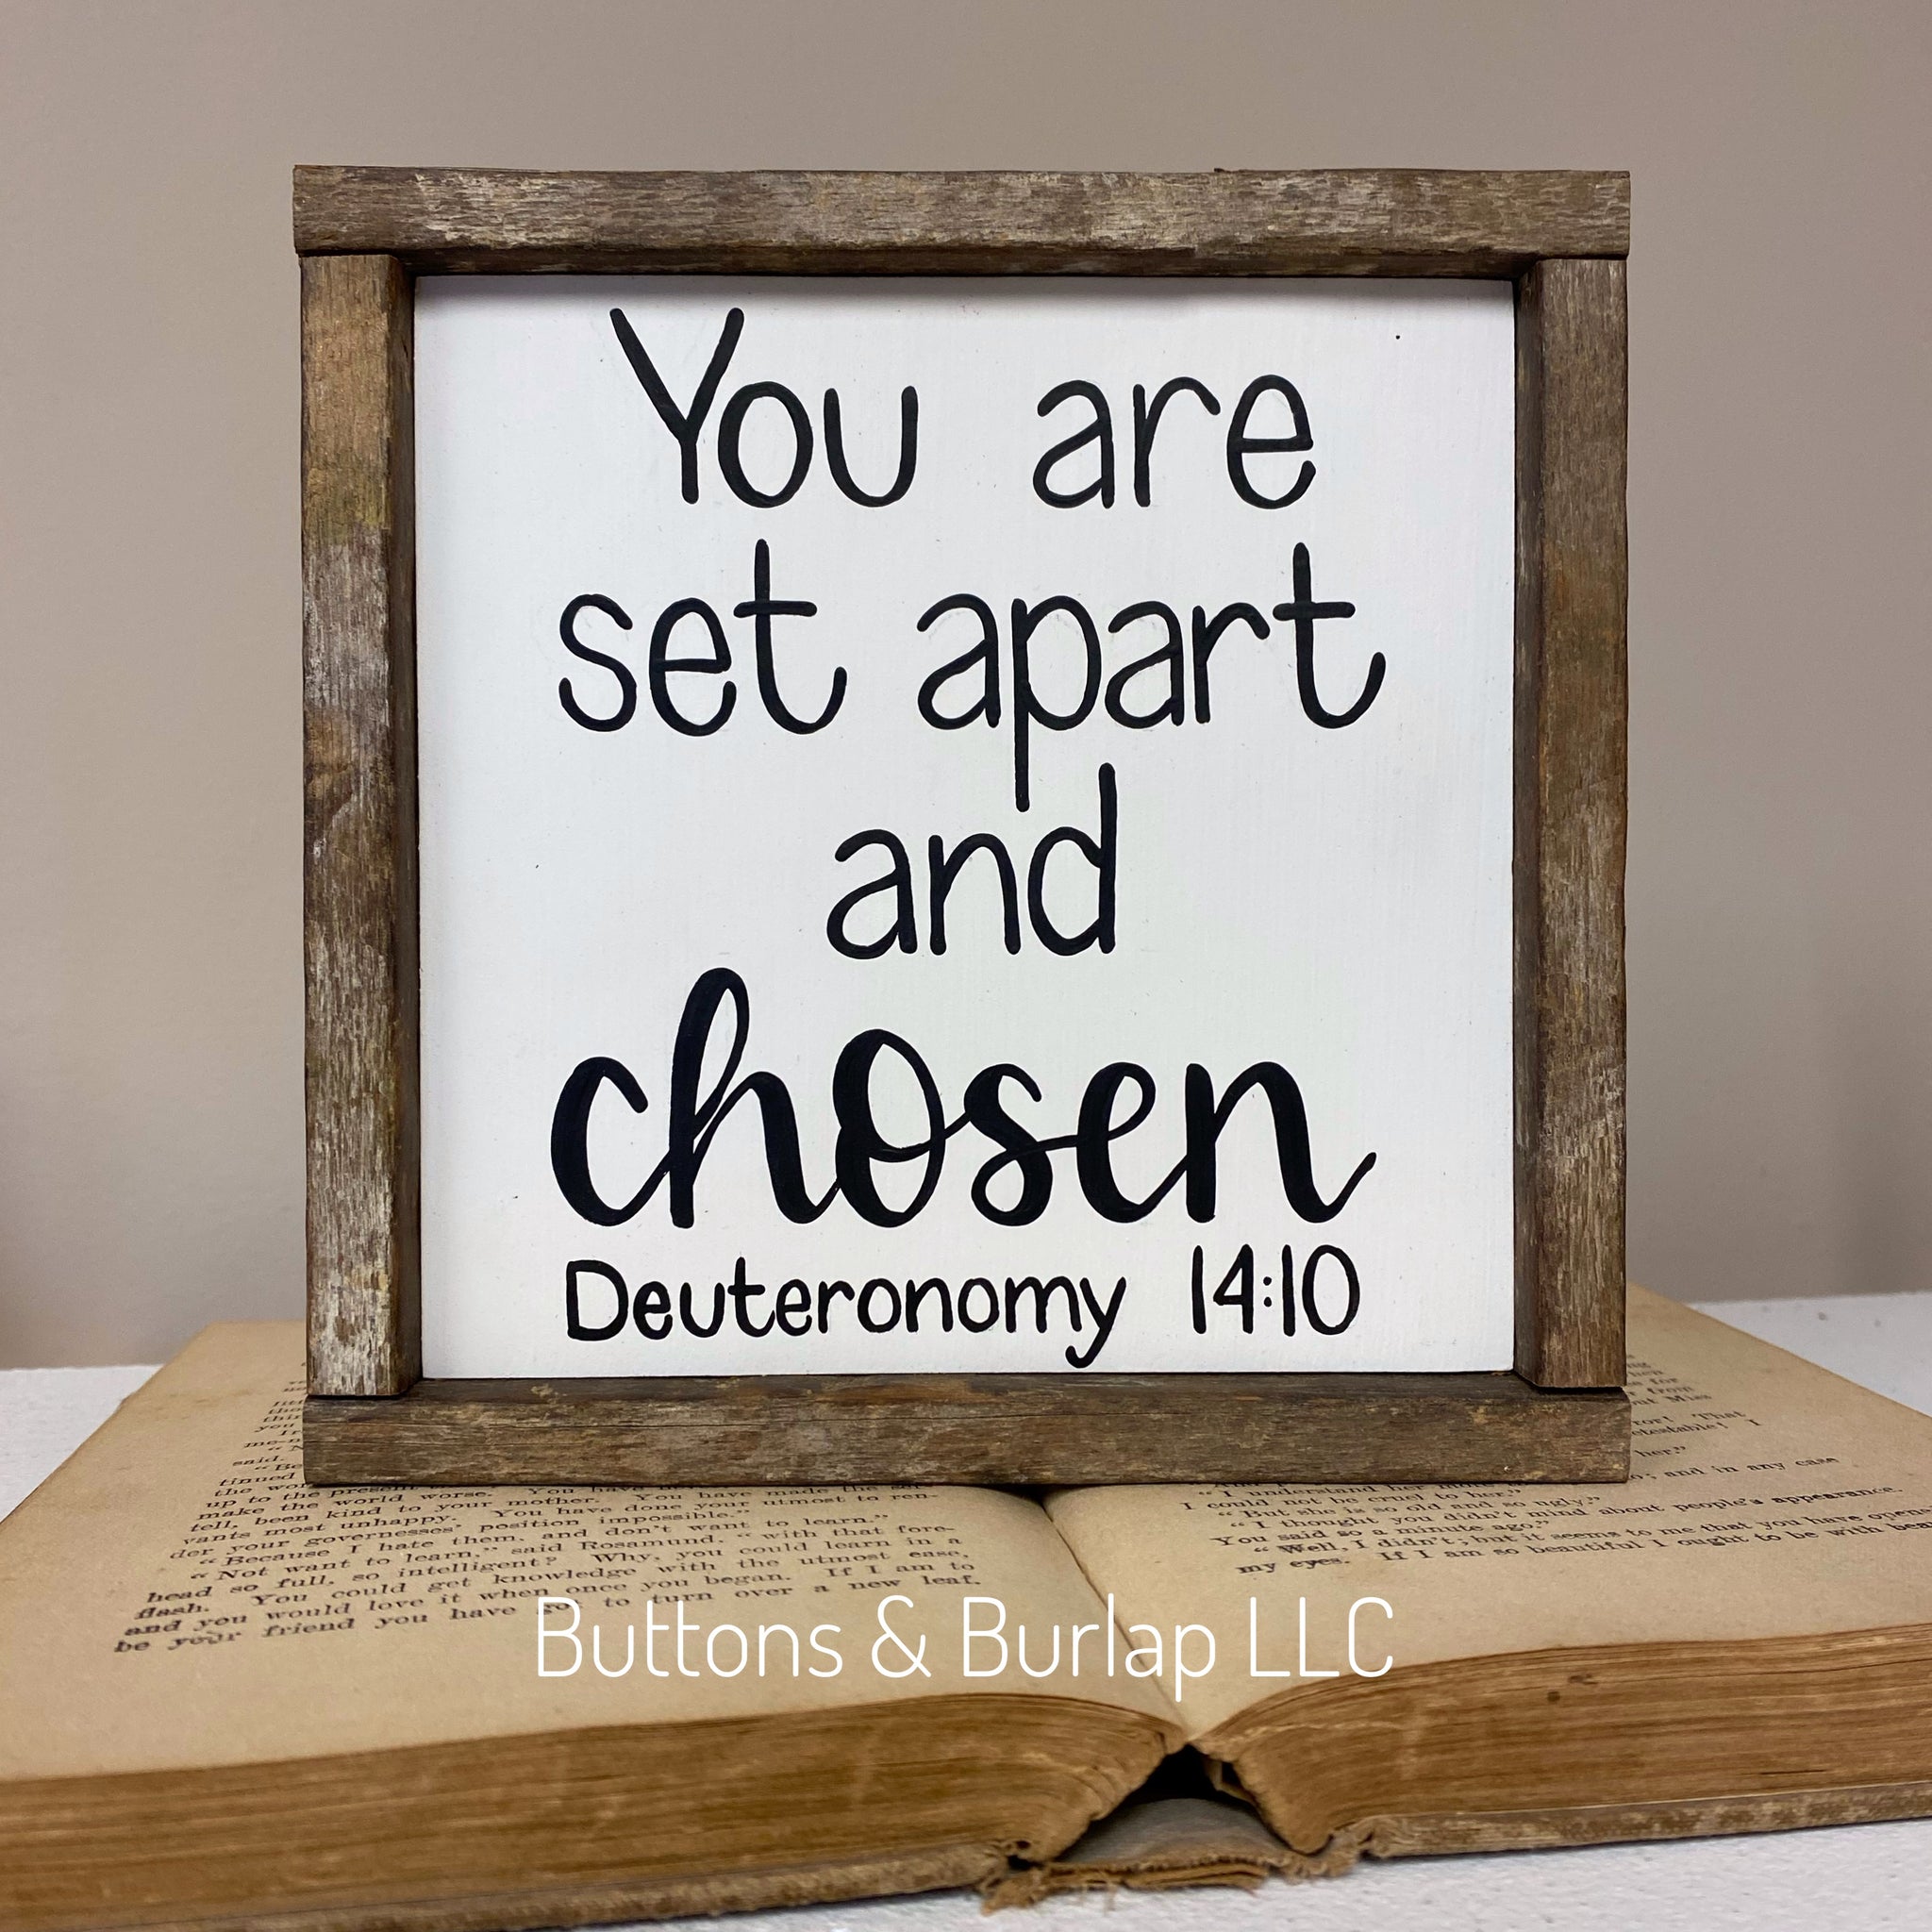 You are set apart and chosen